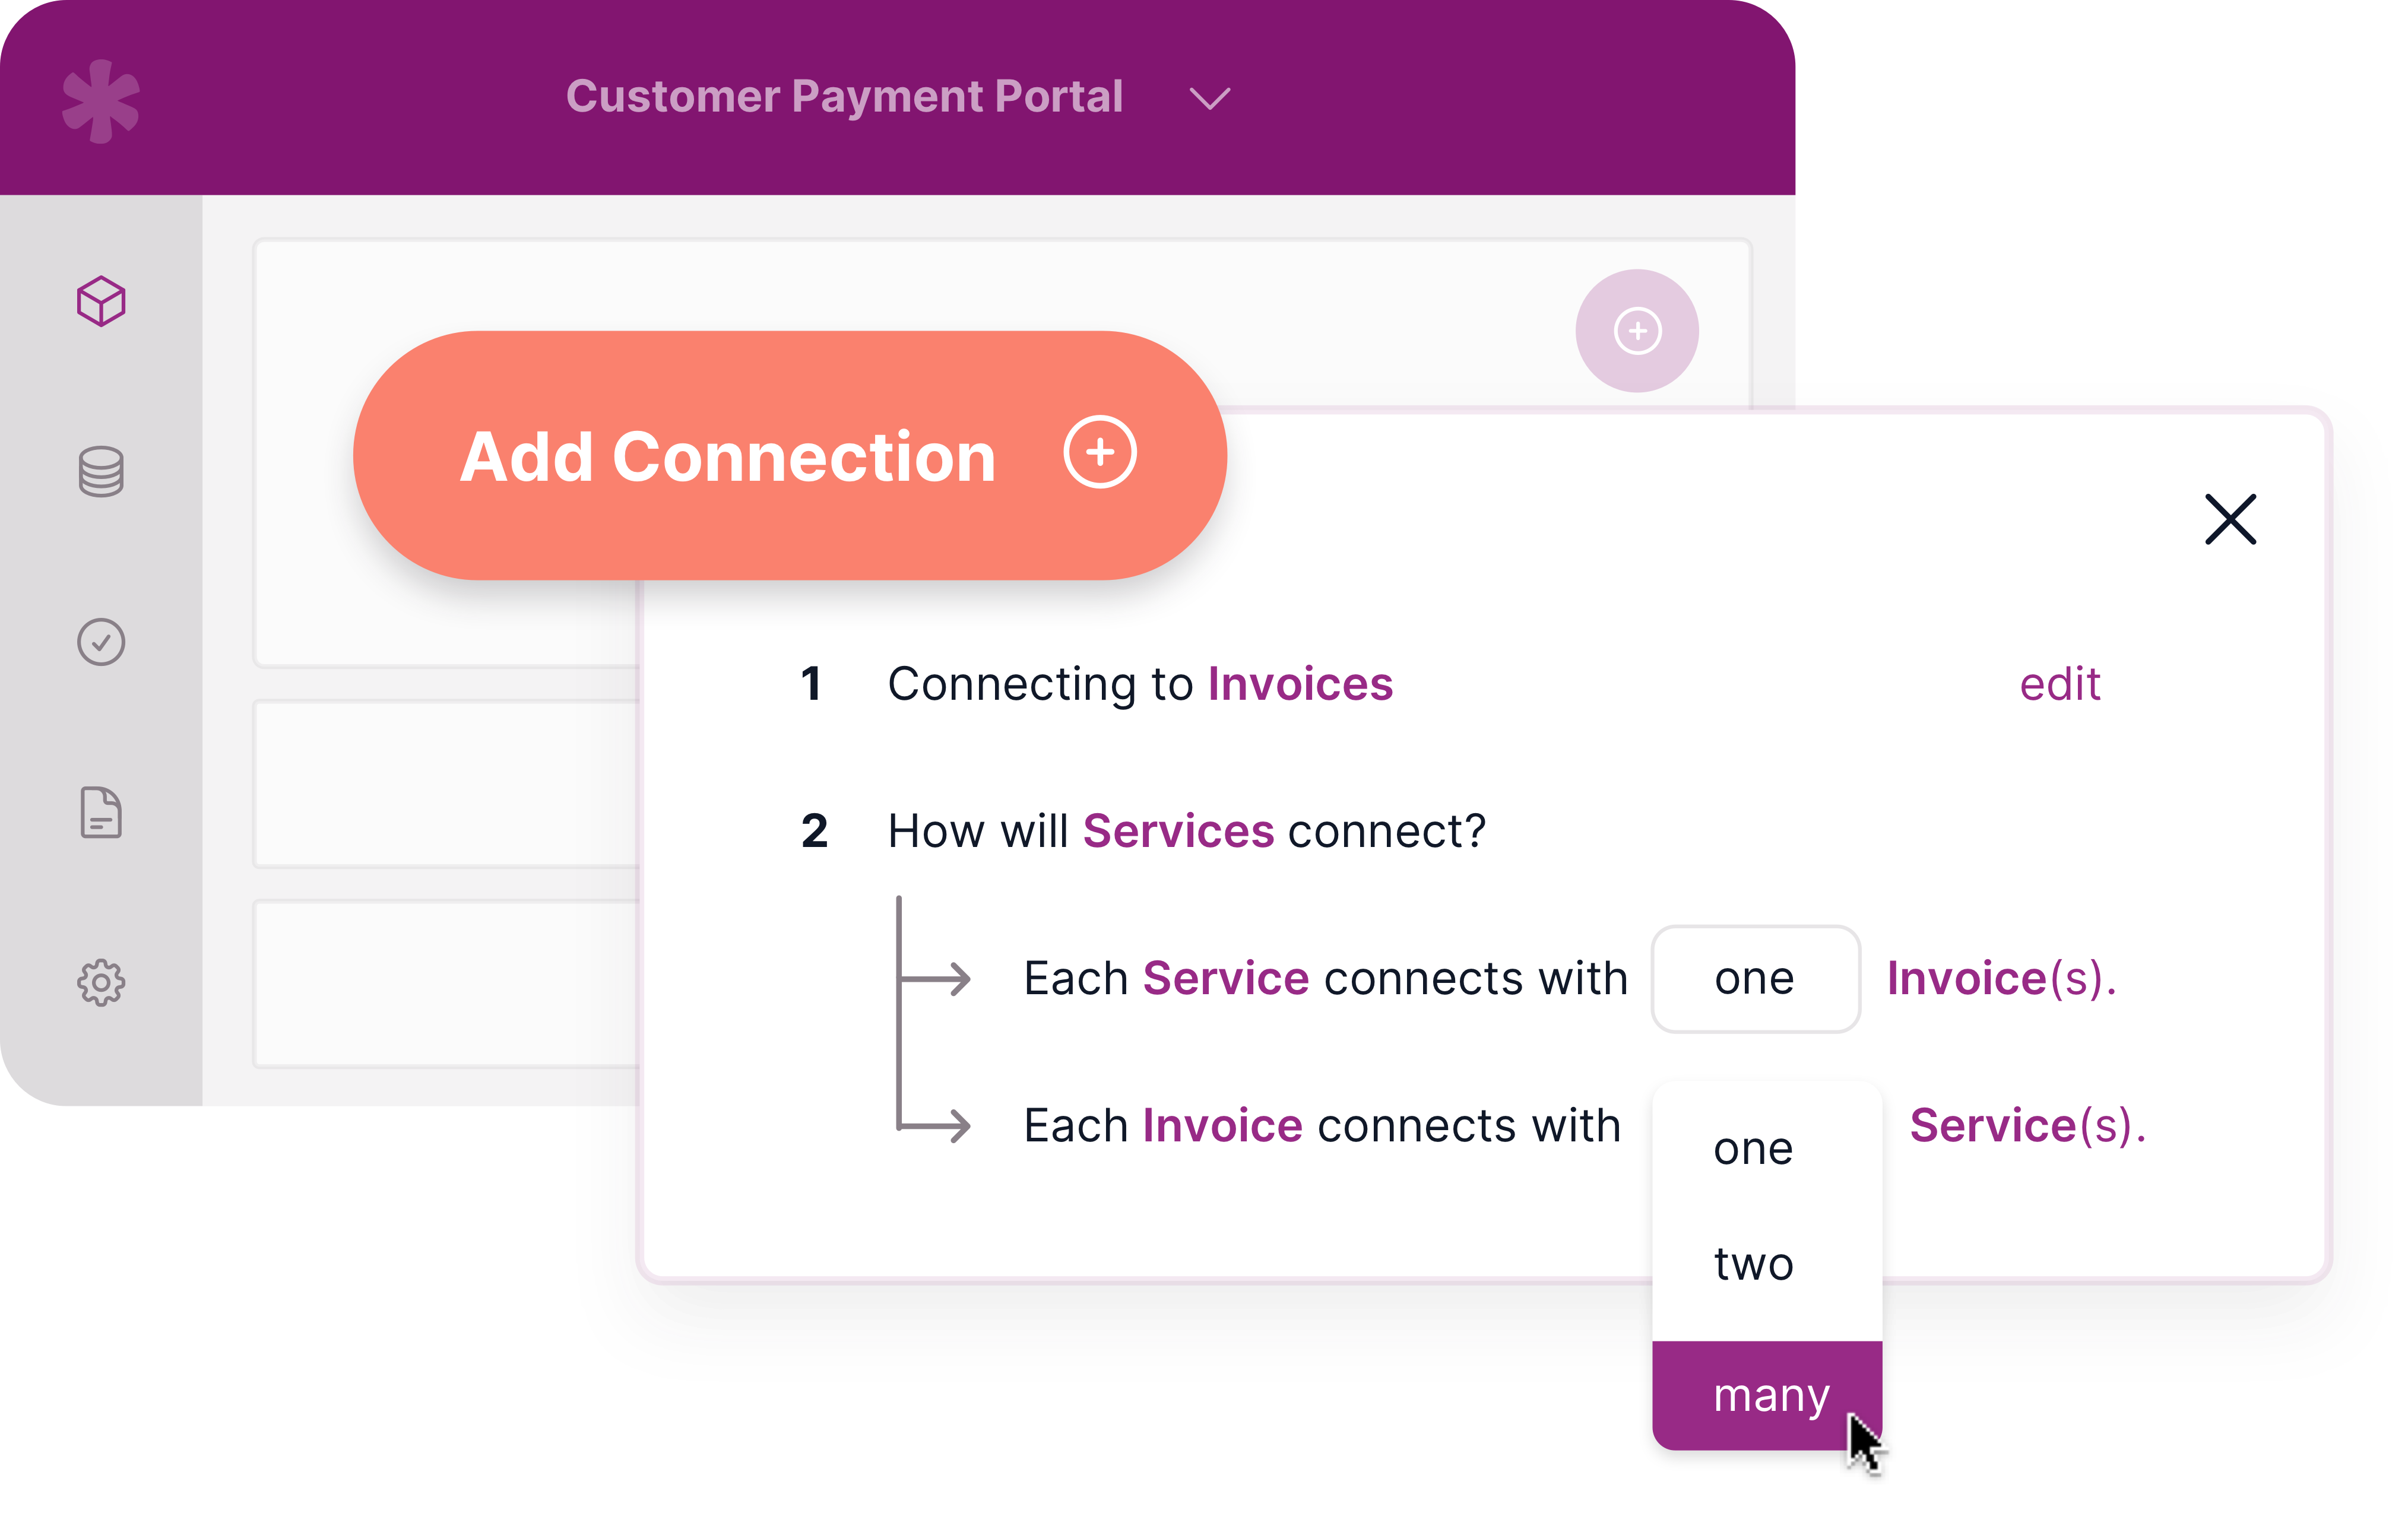 illustration of customer payment portal function showing example of adding connections